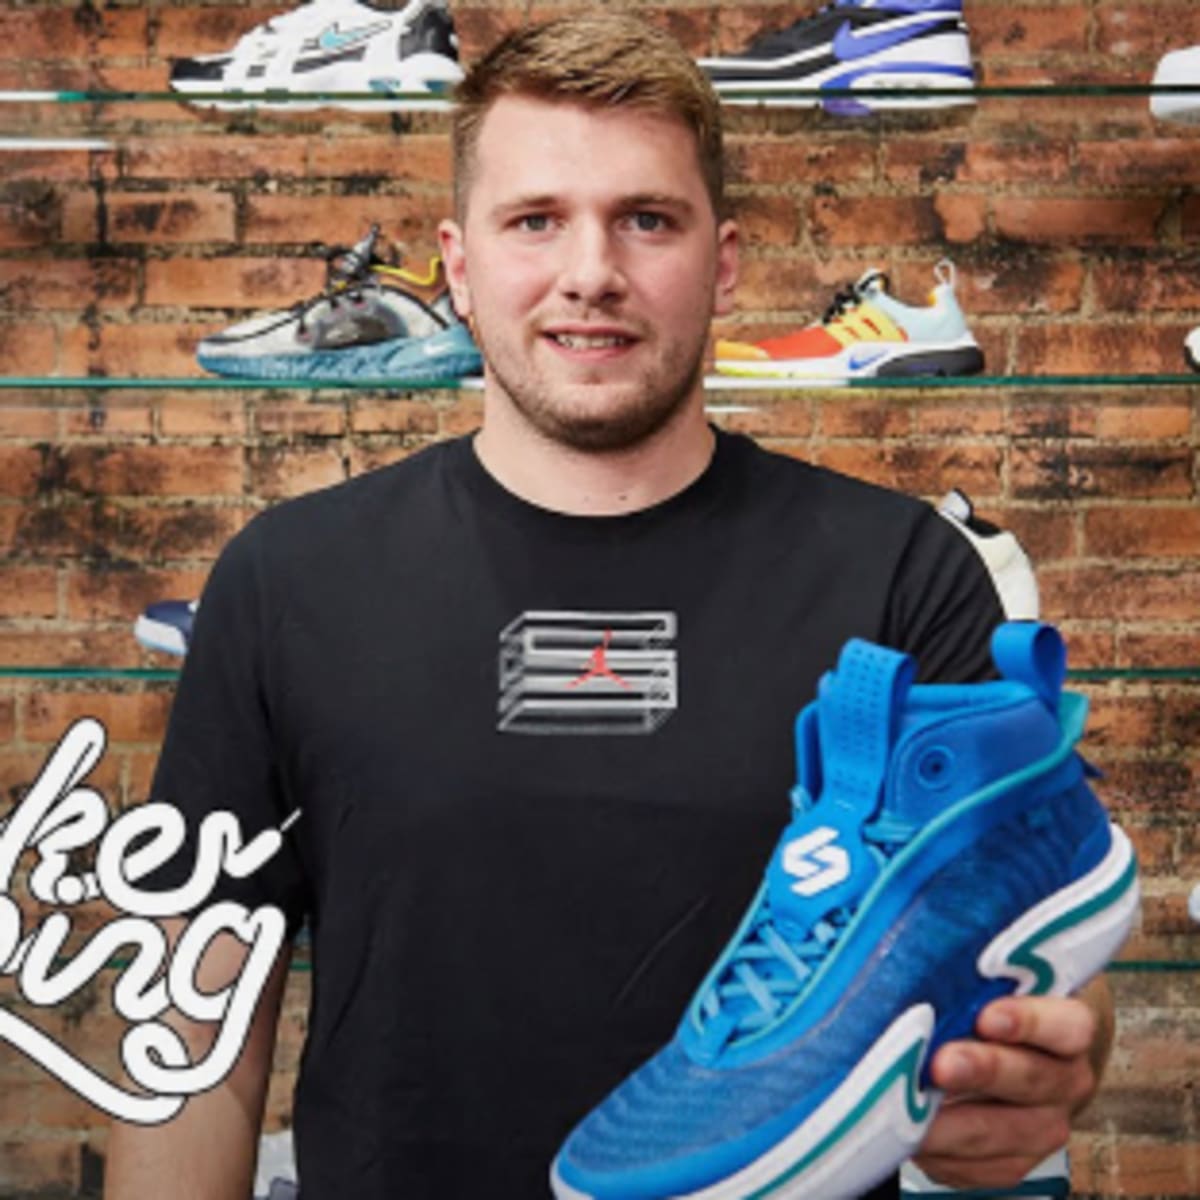 Ranking Luka Doncic's Best Shoes of the NBA Season - Sports Illustrated  FanNation Kicks News, Analysis and More